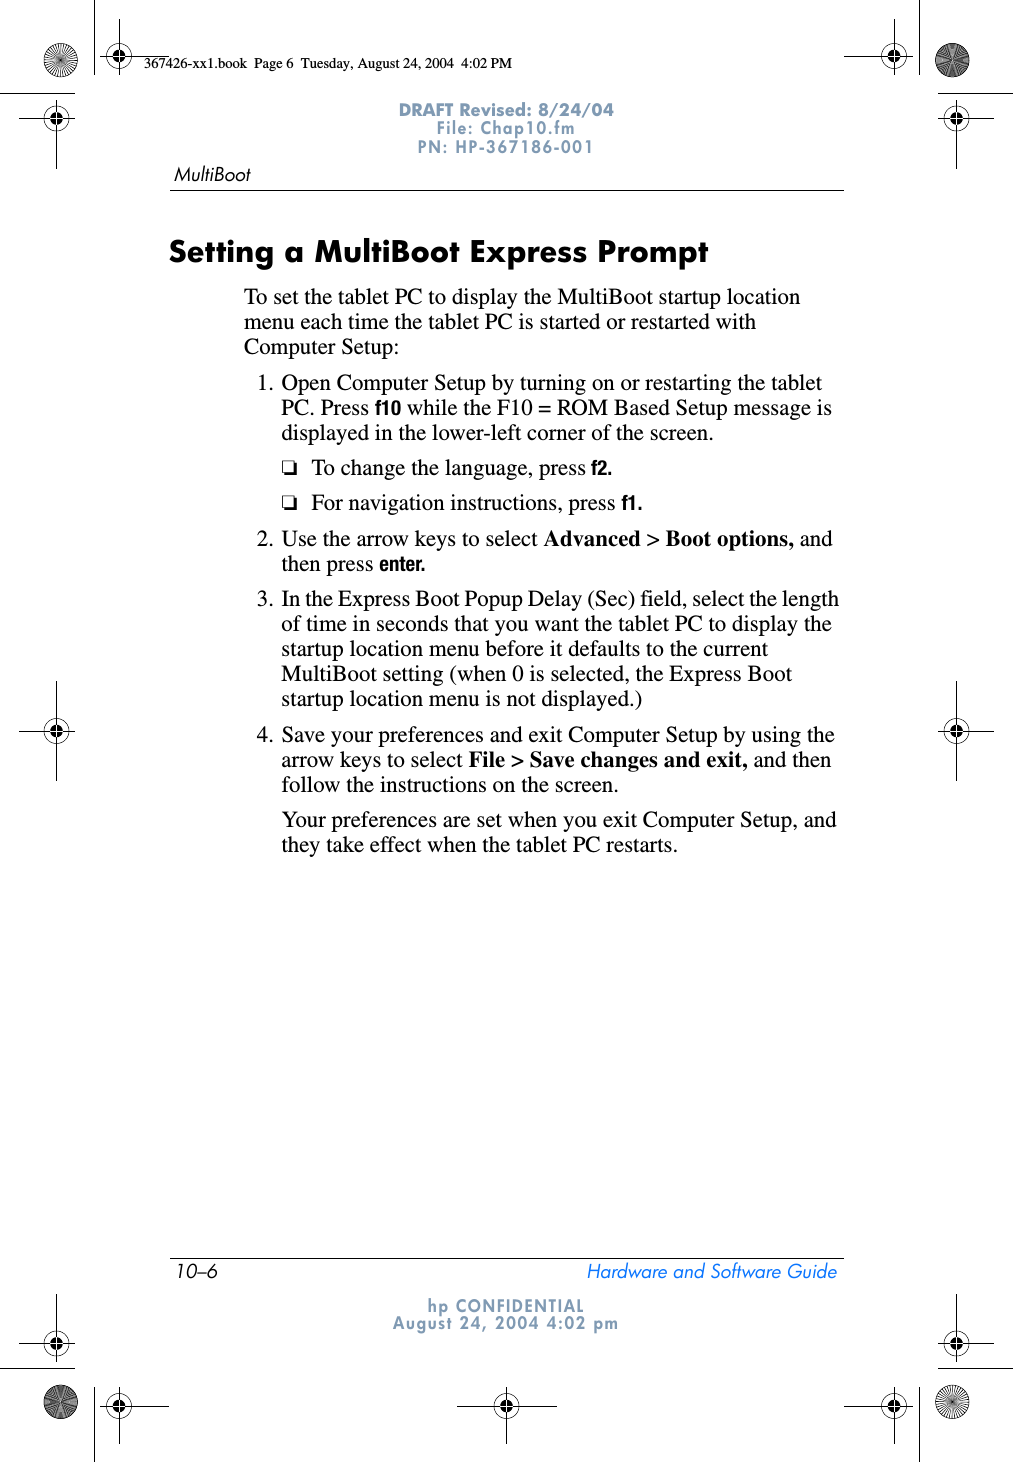 10–6 Hardware and Software GuideMultiBootDRAFT Revised: 8/24/04File: Chap10.fm PN: HP-367186-001 hp CONFIDENTIALAugust 24, 2004 4:02 pmSetting a MultiBoot Express PromptTo set the tablet PC to display the MultiBoot startup location menu each time the tablet PC is started or restarted with Computer Setup:1. Open Computer Setup by turning on or restarting the tablet PC. Press f10 while the F10 = ROM Based Setup message is displayed in the lower-left corner of the screen.❏To change the language, press f2.❏For navigation instructions, press f1.2. Use the arrow keys to select Advanced &gt; Boot options, and then press enter.3. In the Express Boot Popup Delay (Sec) field, select the length of time in seconds that you want the tablet PC to display the startup location menu before it defaults to the current MultiBoot setting (when 0 is selected, the Express Boot startup location menu is not displayed.)4. Save your preferences and exit Computer Setup by using the arrow keys to select File &gt; Save changes and exit, and then follow the instructions on the screen.Your preferences are set when you exit Computer Setup, and they take effect when the tablet PC restarts.367426-xx1.book  Page 6  Tuesday, August 24, 2004  4:02 PM